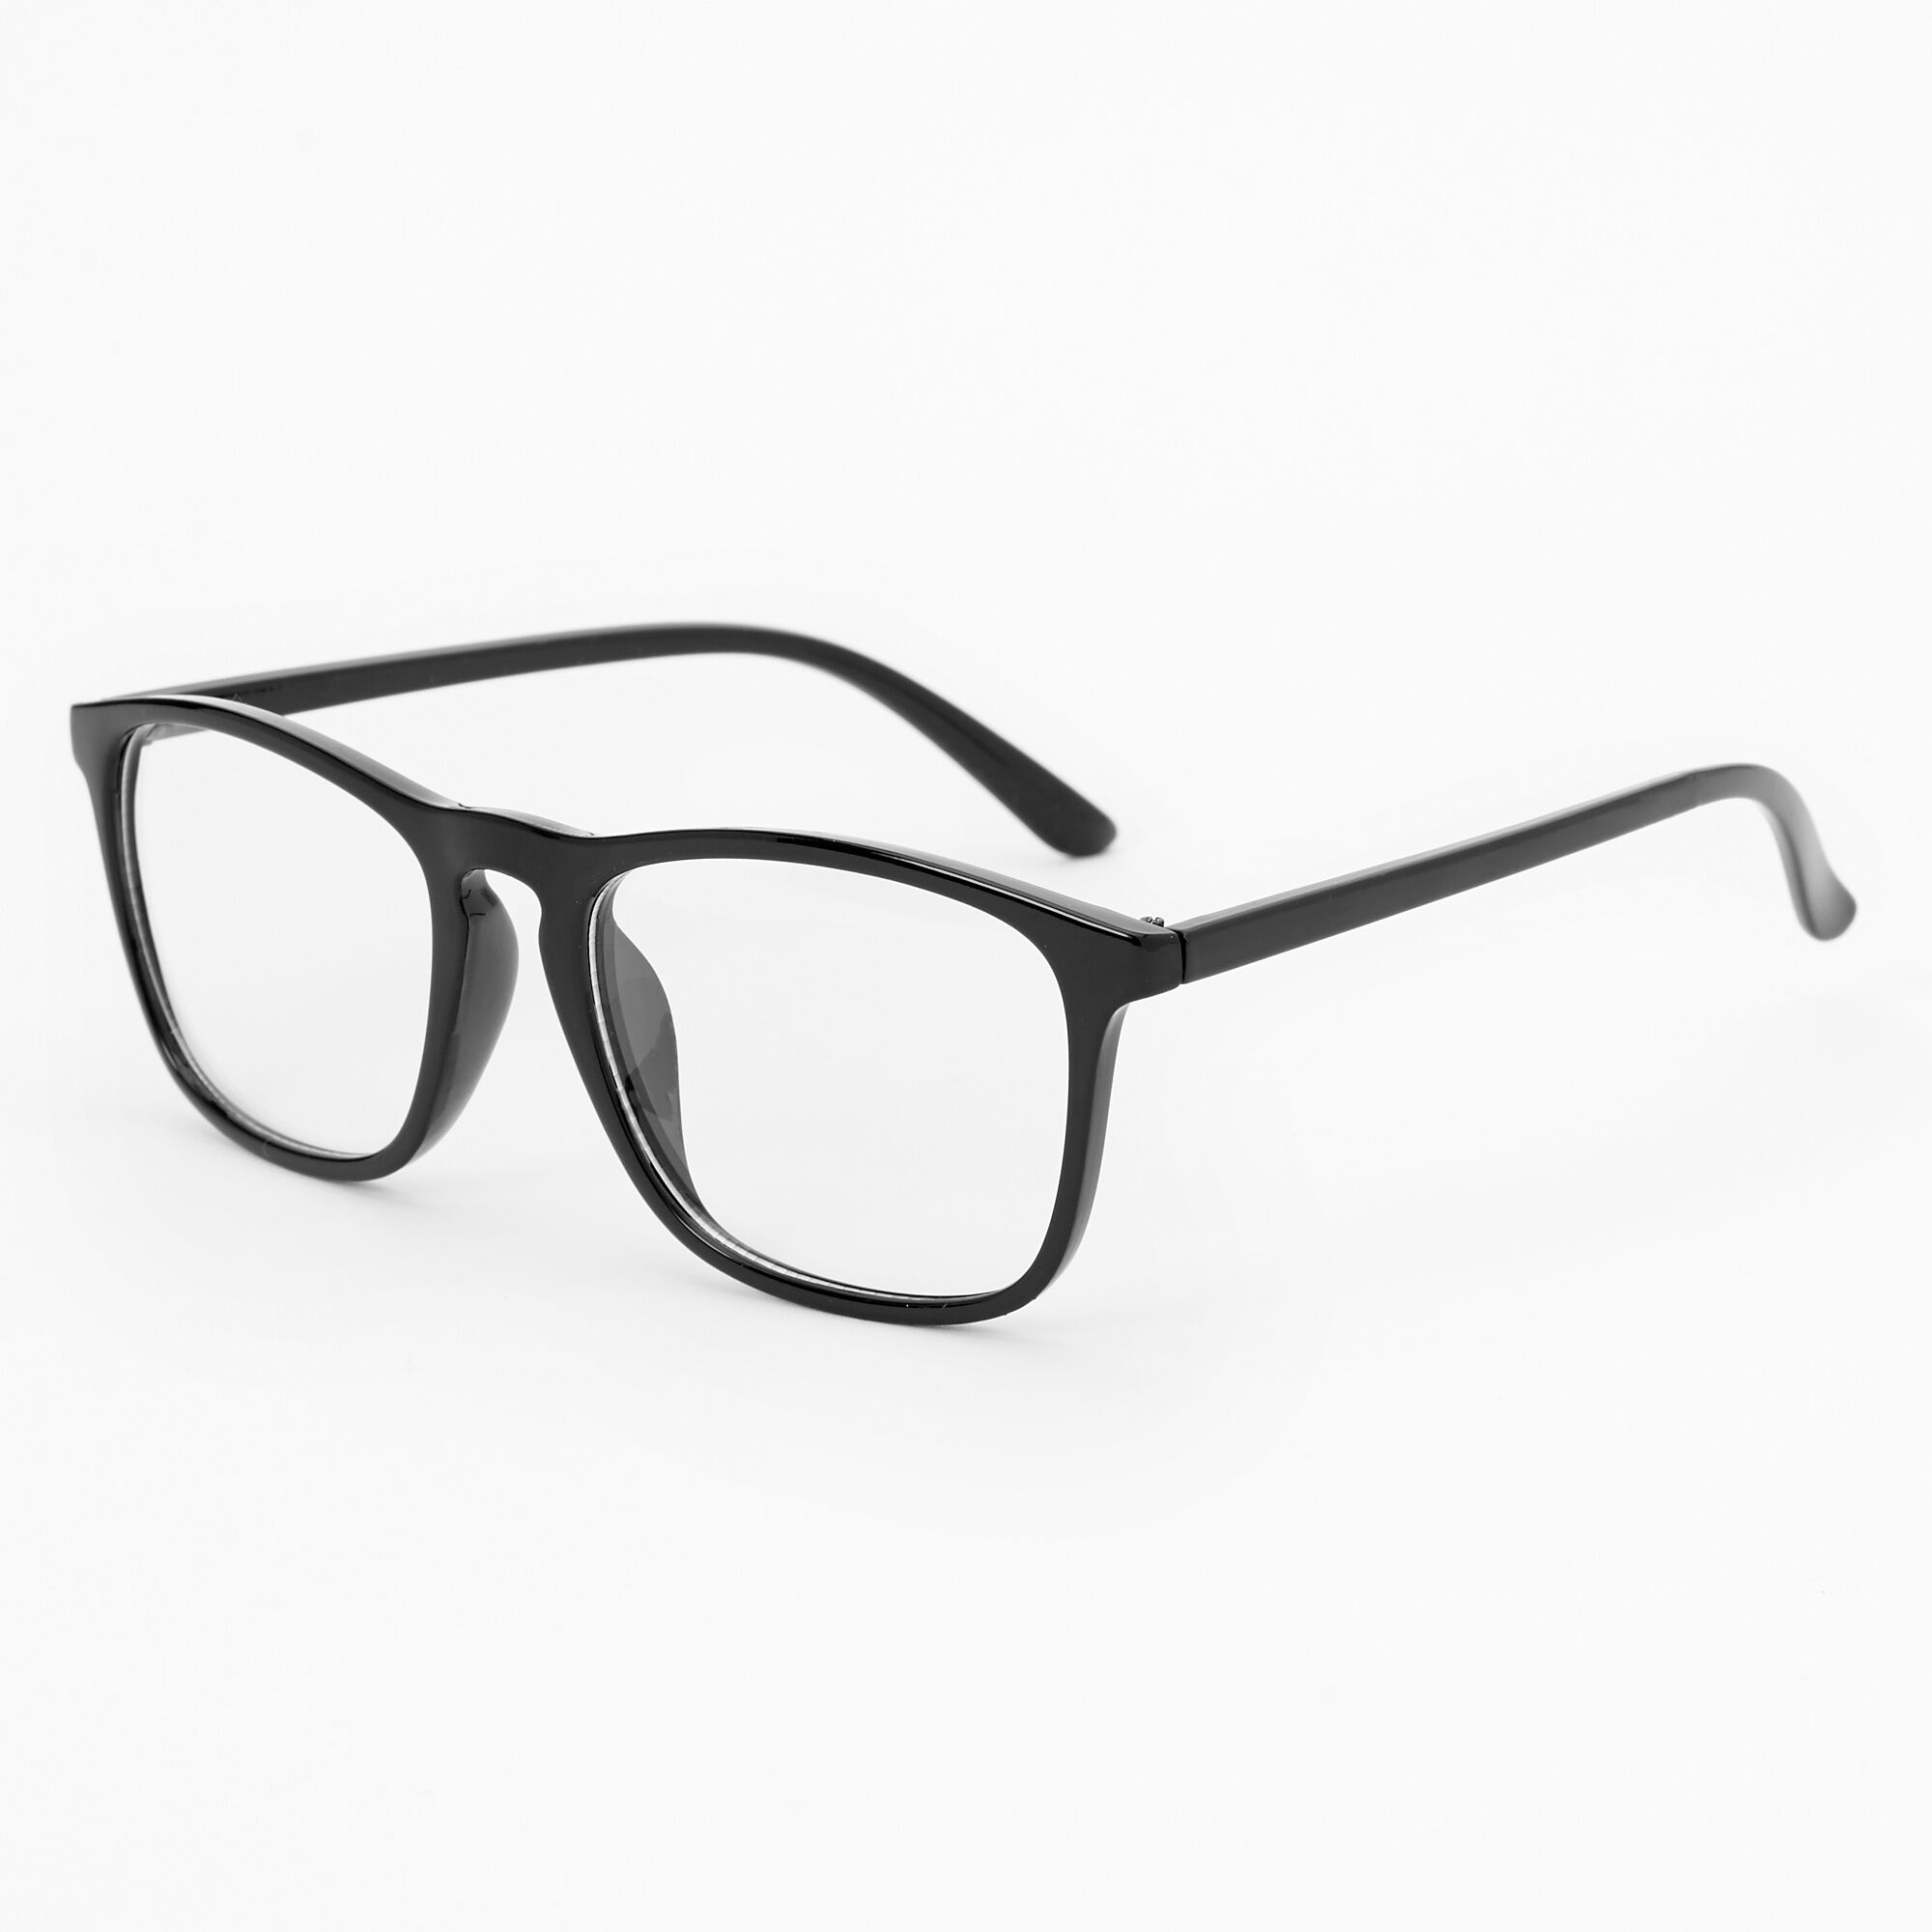 View Claires Solid Retro Clear Glass Frames Black information